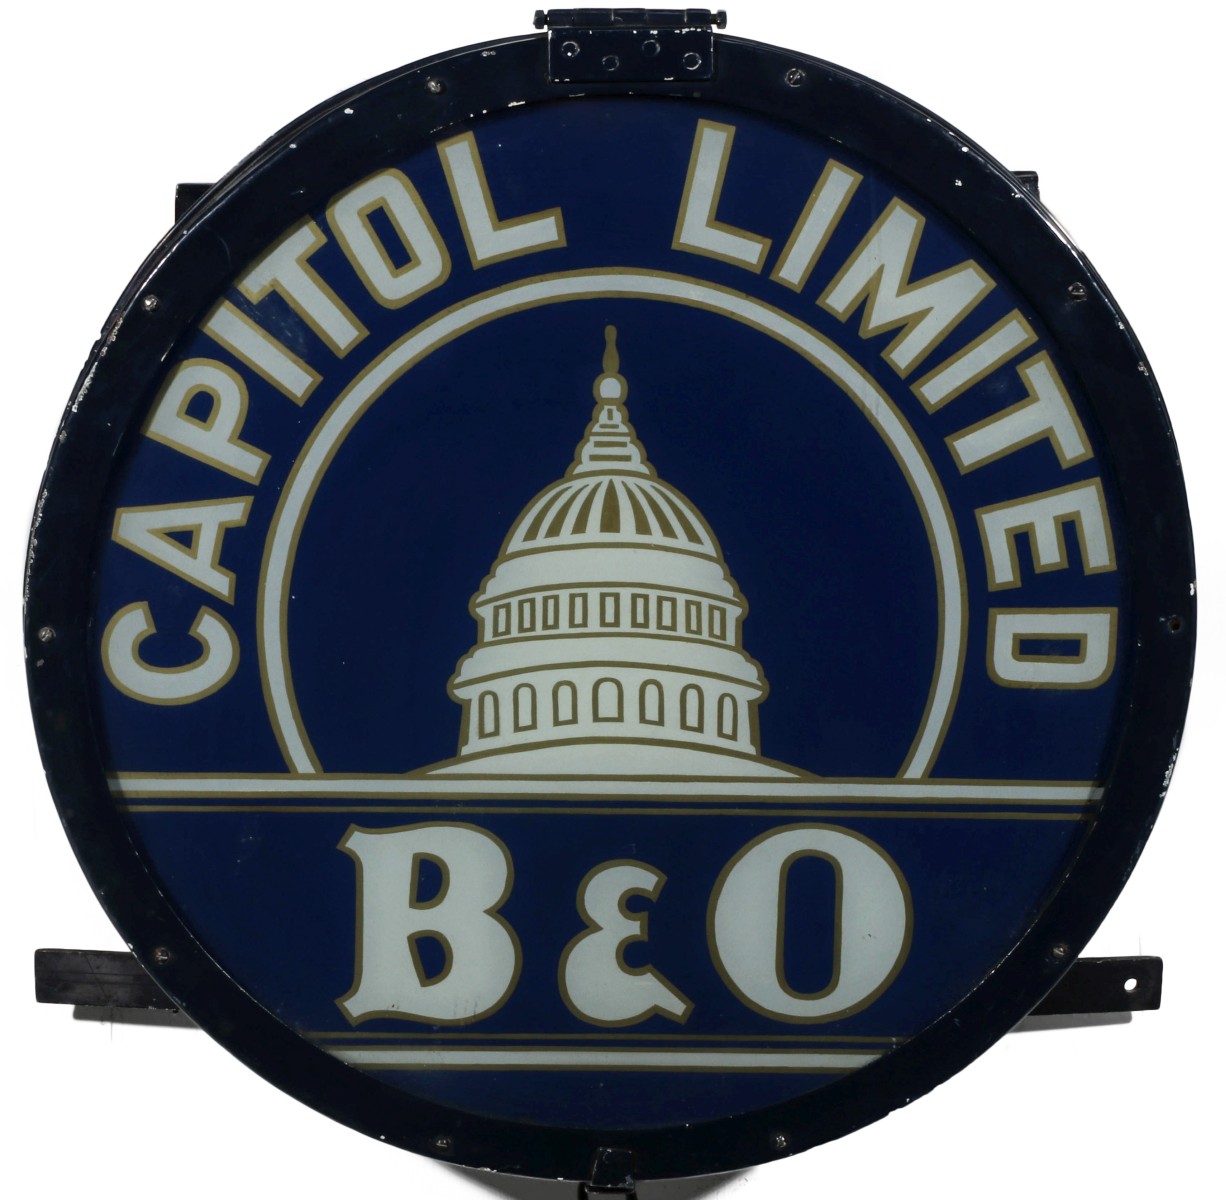 AN ORIGINAL DRUMHEAD SIGN FOR THE B&O CAPITOL LIMITED